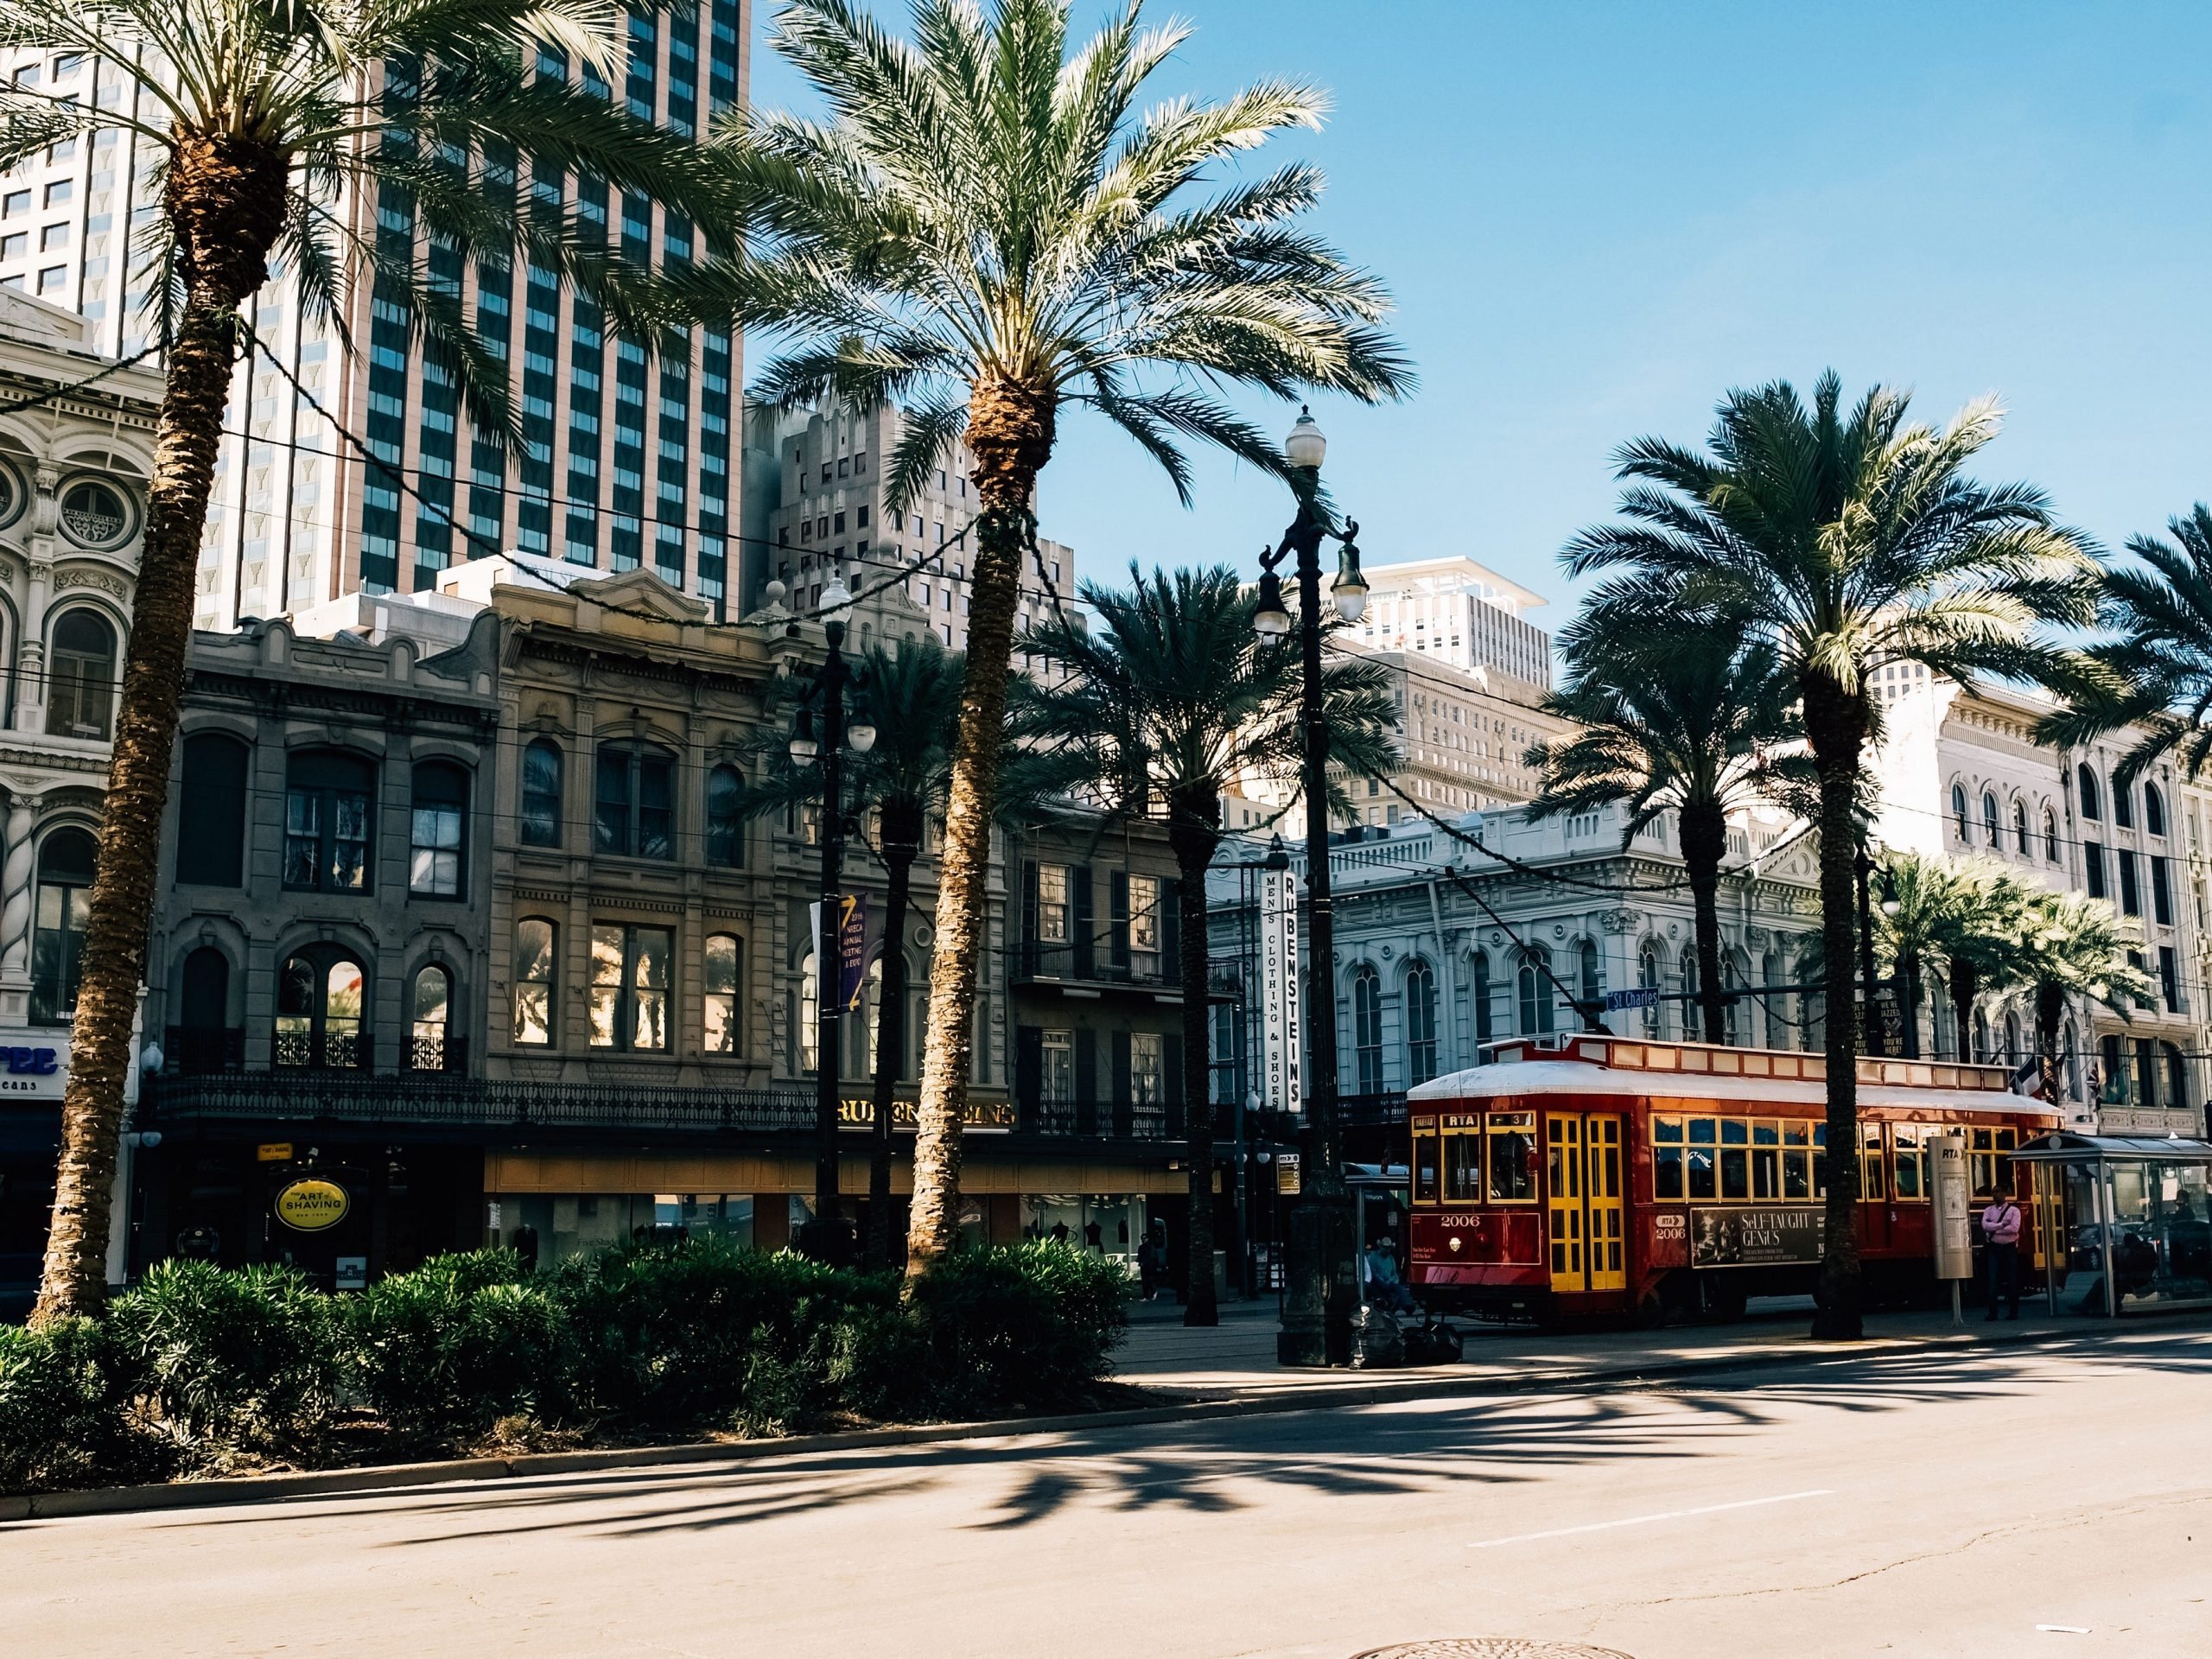 A streetcar drives through the heart of New Orleans